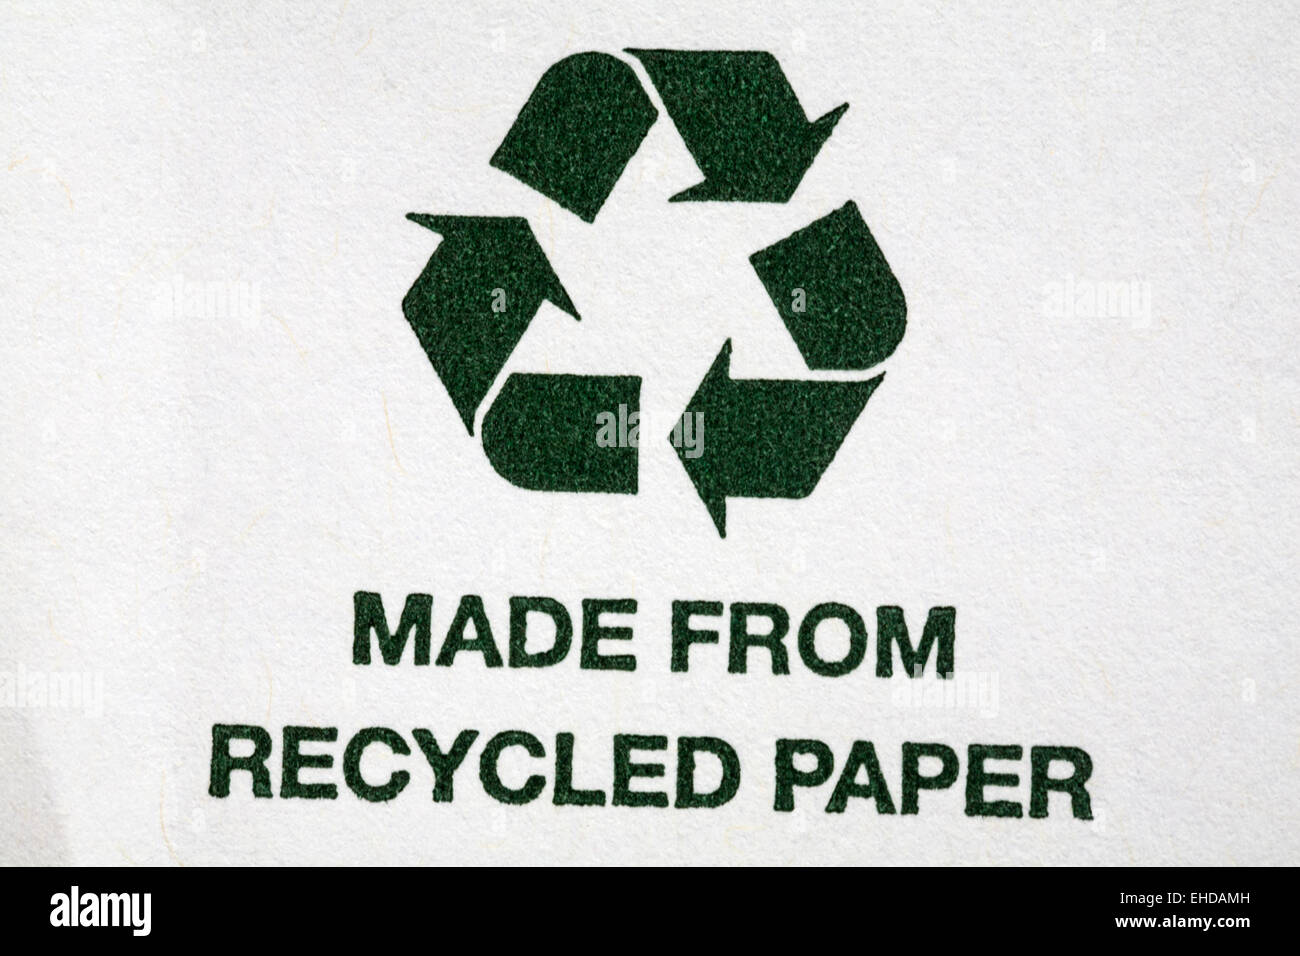 Made from recycled paper and recycle logo on white envelope Stock Photo